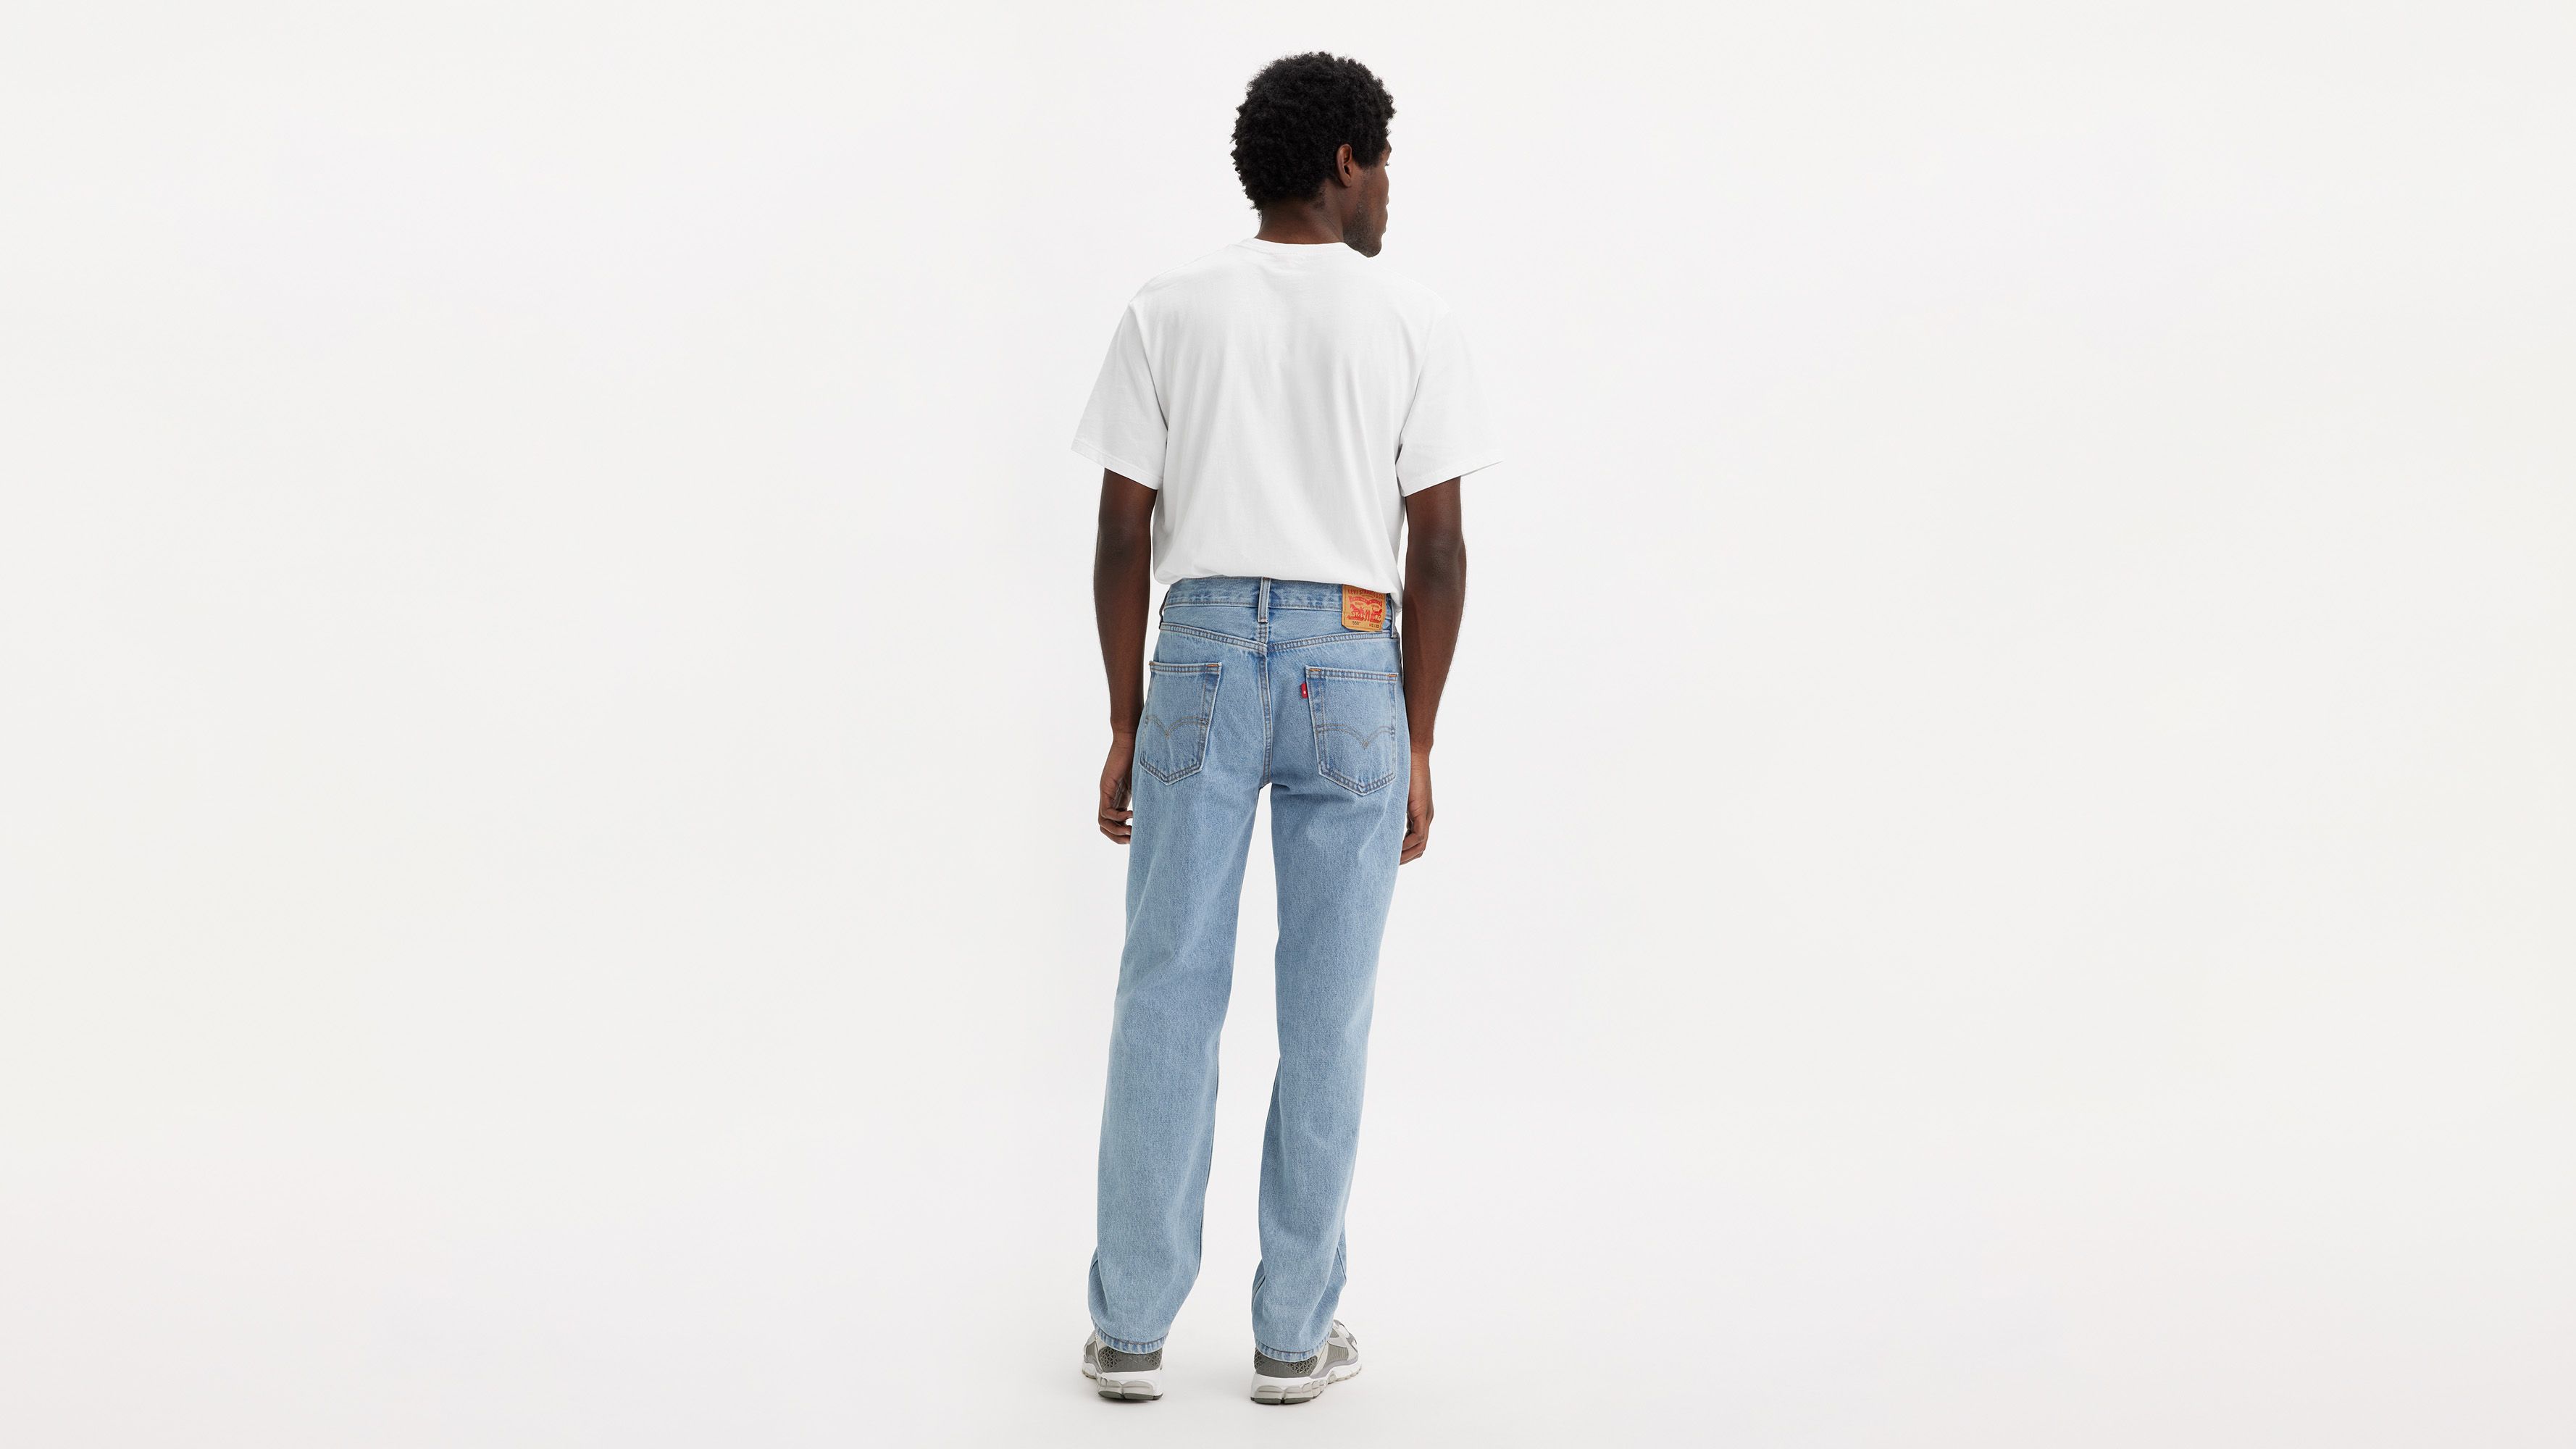 550™ Relaxed Fit Men's Jeans - Light Wash | Levi's® US